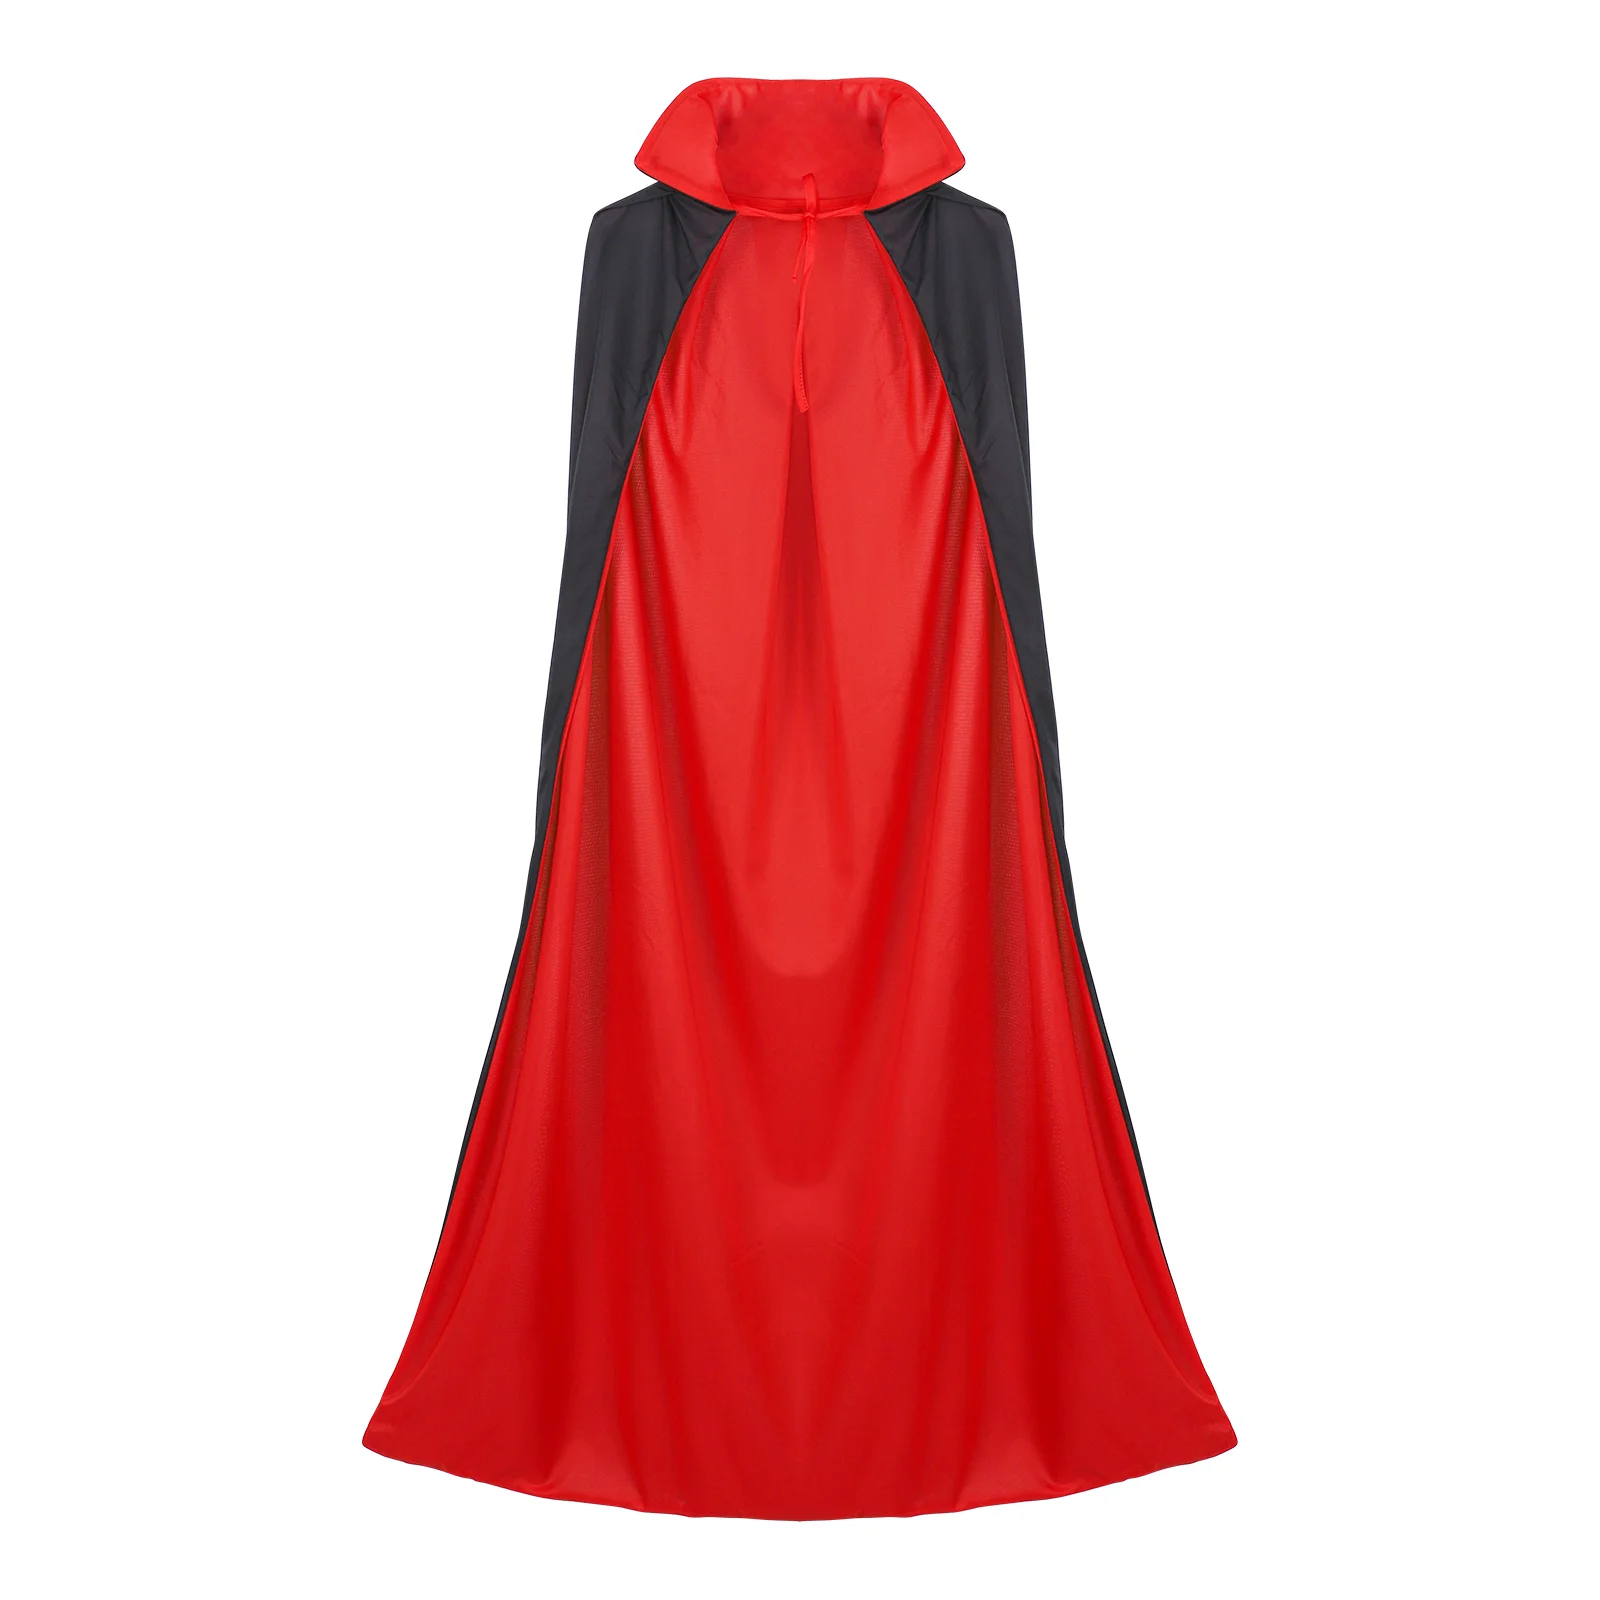 

Costume Party Cape Halloween Cloak Masquerade Props Vampire Capes Adults Cosplay